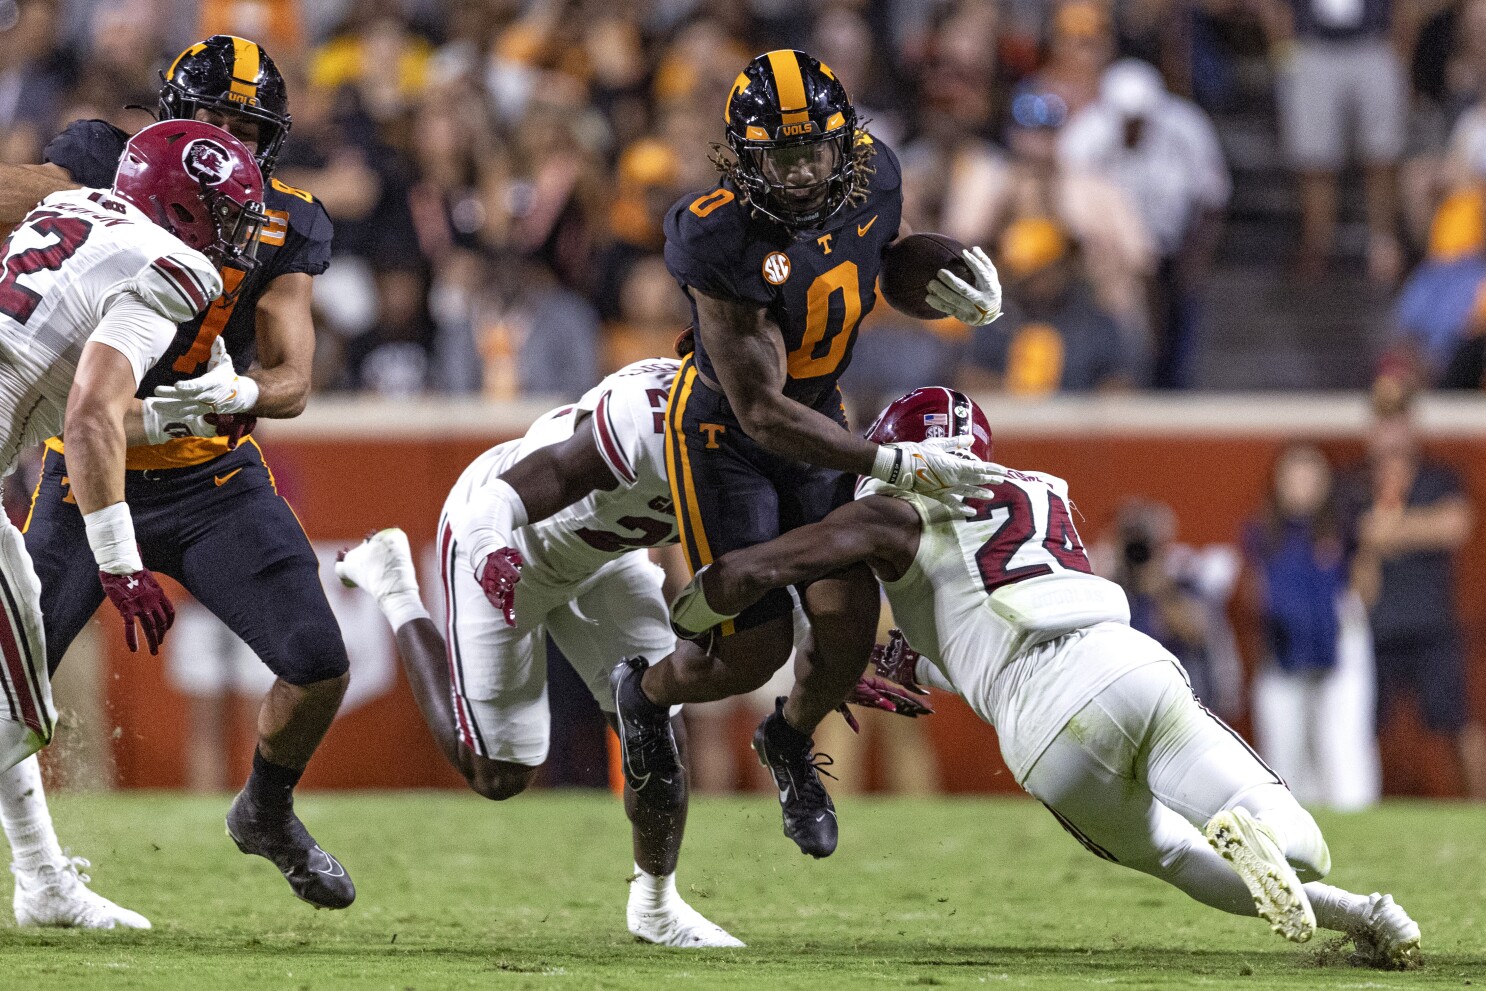 4 Tennessee clinches SEC East with win at #21 South Carolina